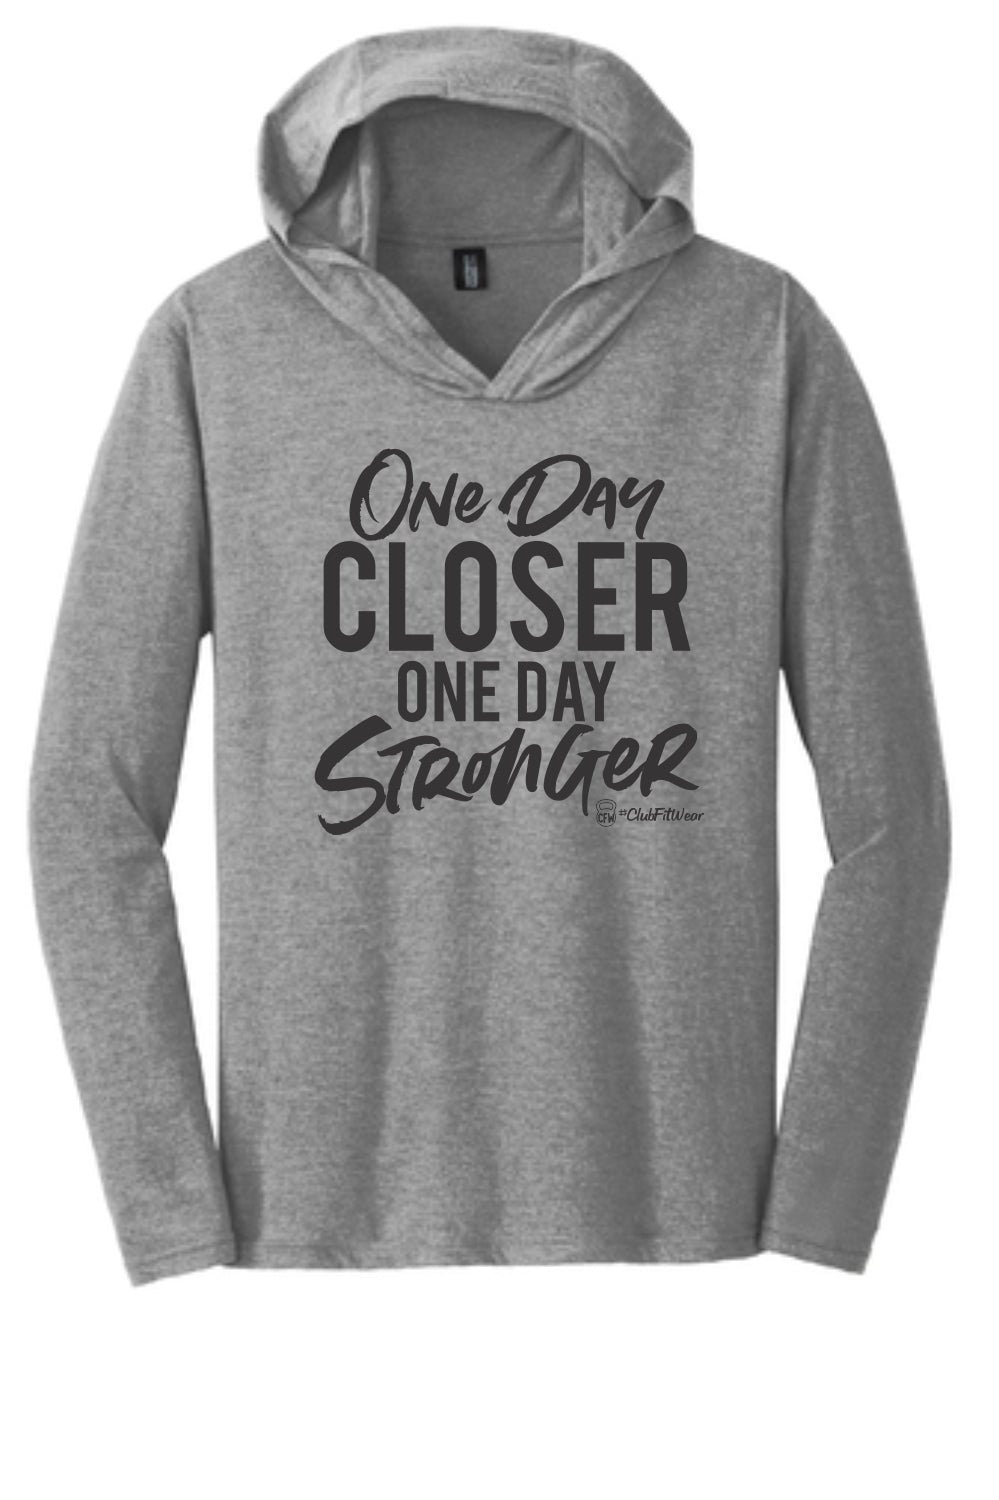 One Day Closer One Day Stronger - Unisex Hooded Pullover